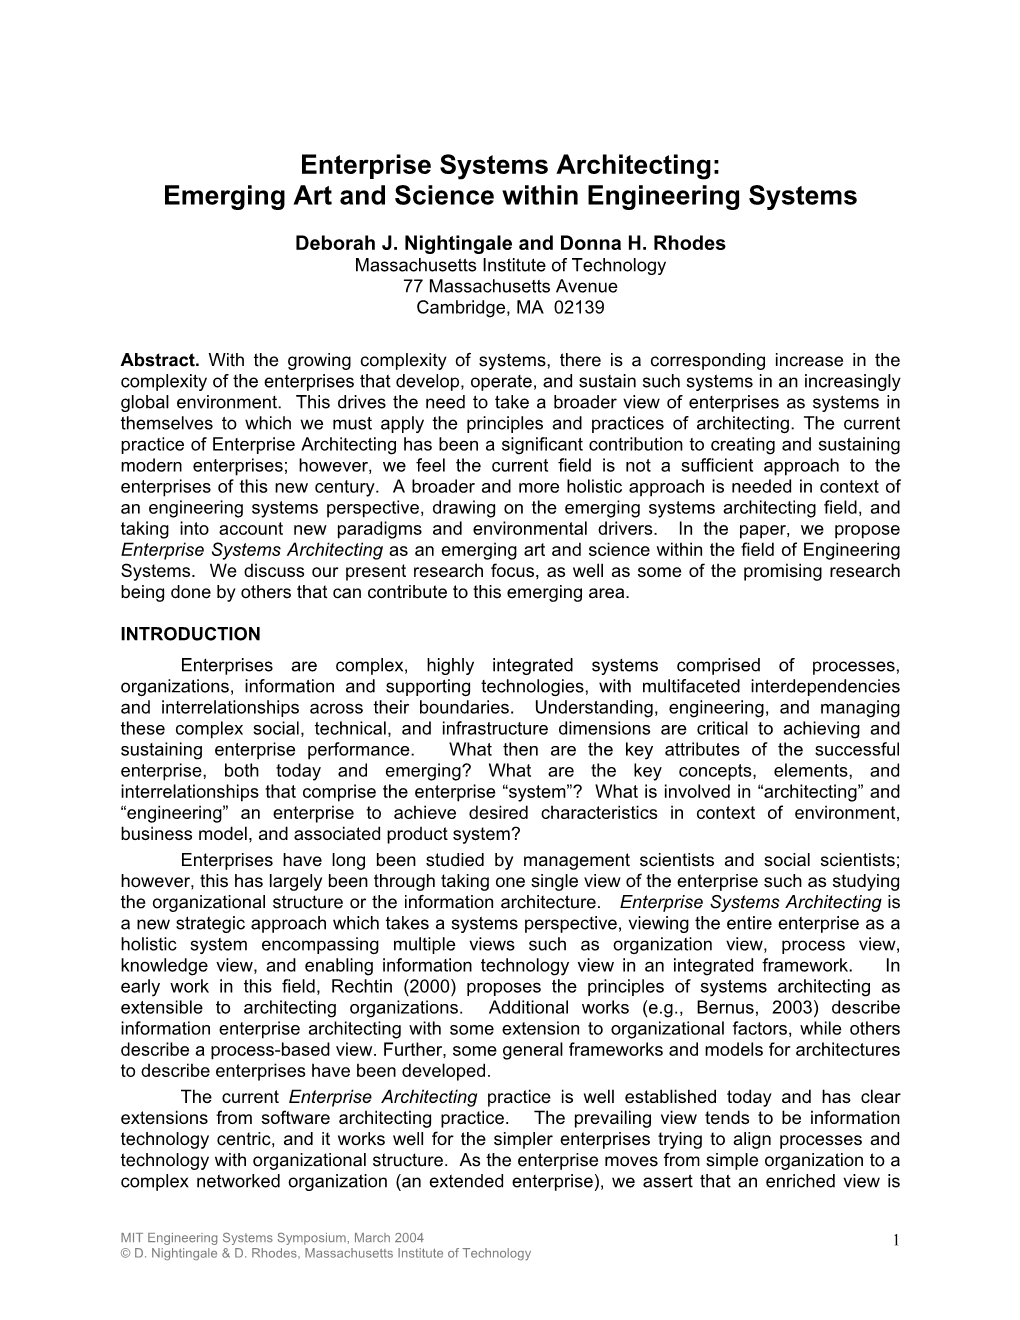 Enterprise Systems Architecting: Emerging Art and Science Within Engineering Systems